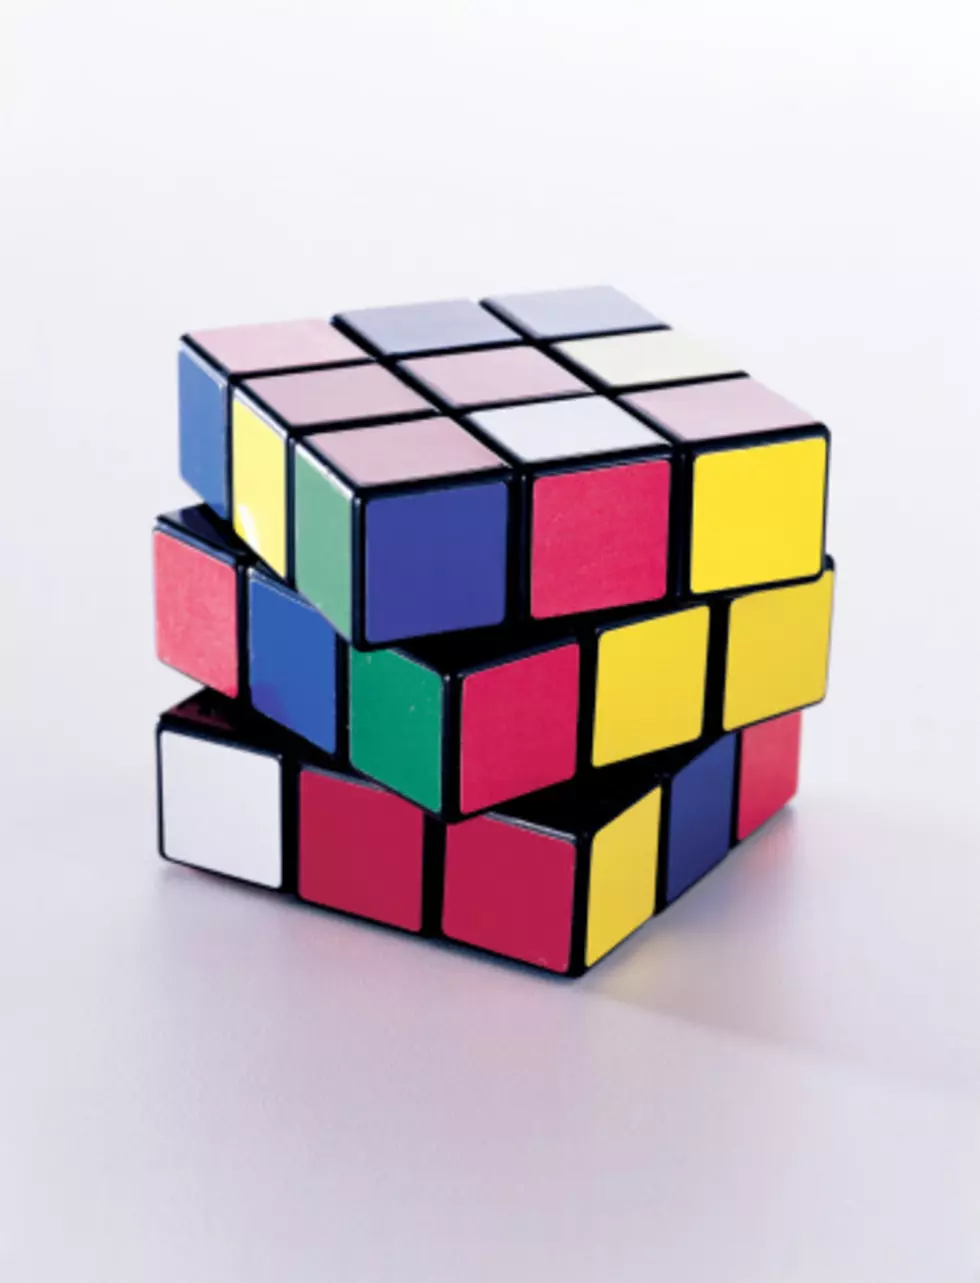 Today Is The 40th Anniversary Of The Debut Of Rubik’s Cube And Here’s How To Solve It [VIDEO]